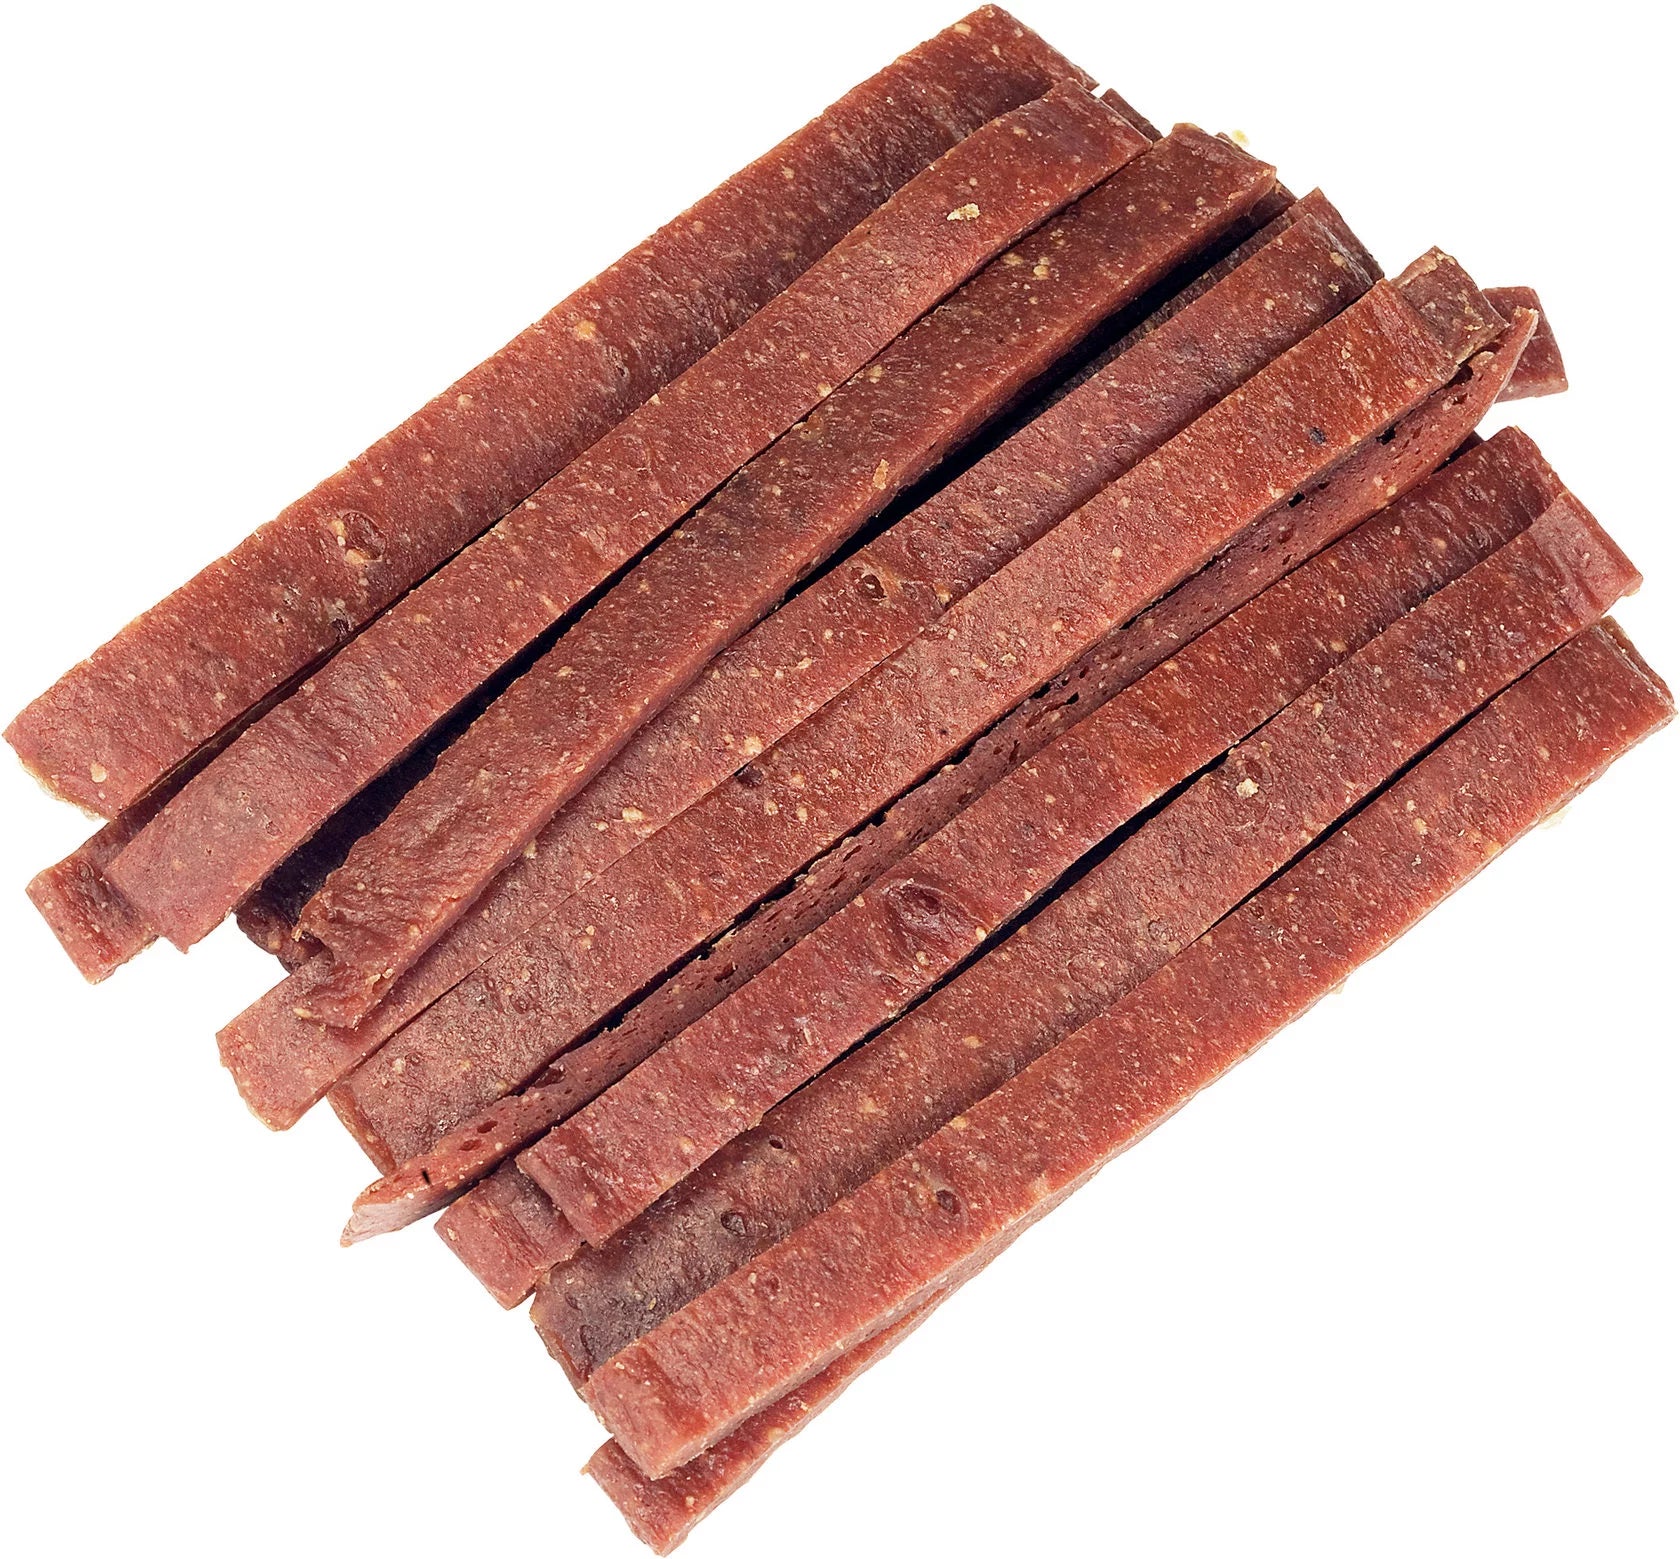 Dog Fest Beef Slices for Small Breeds